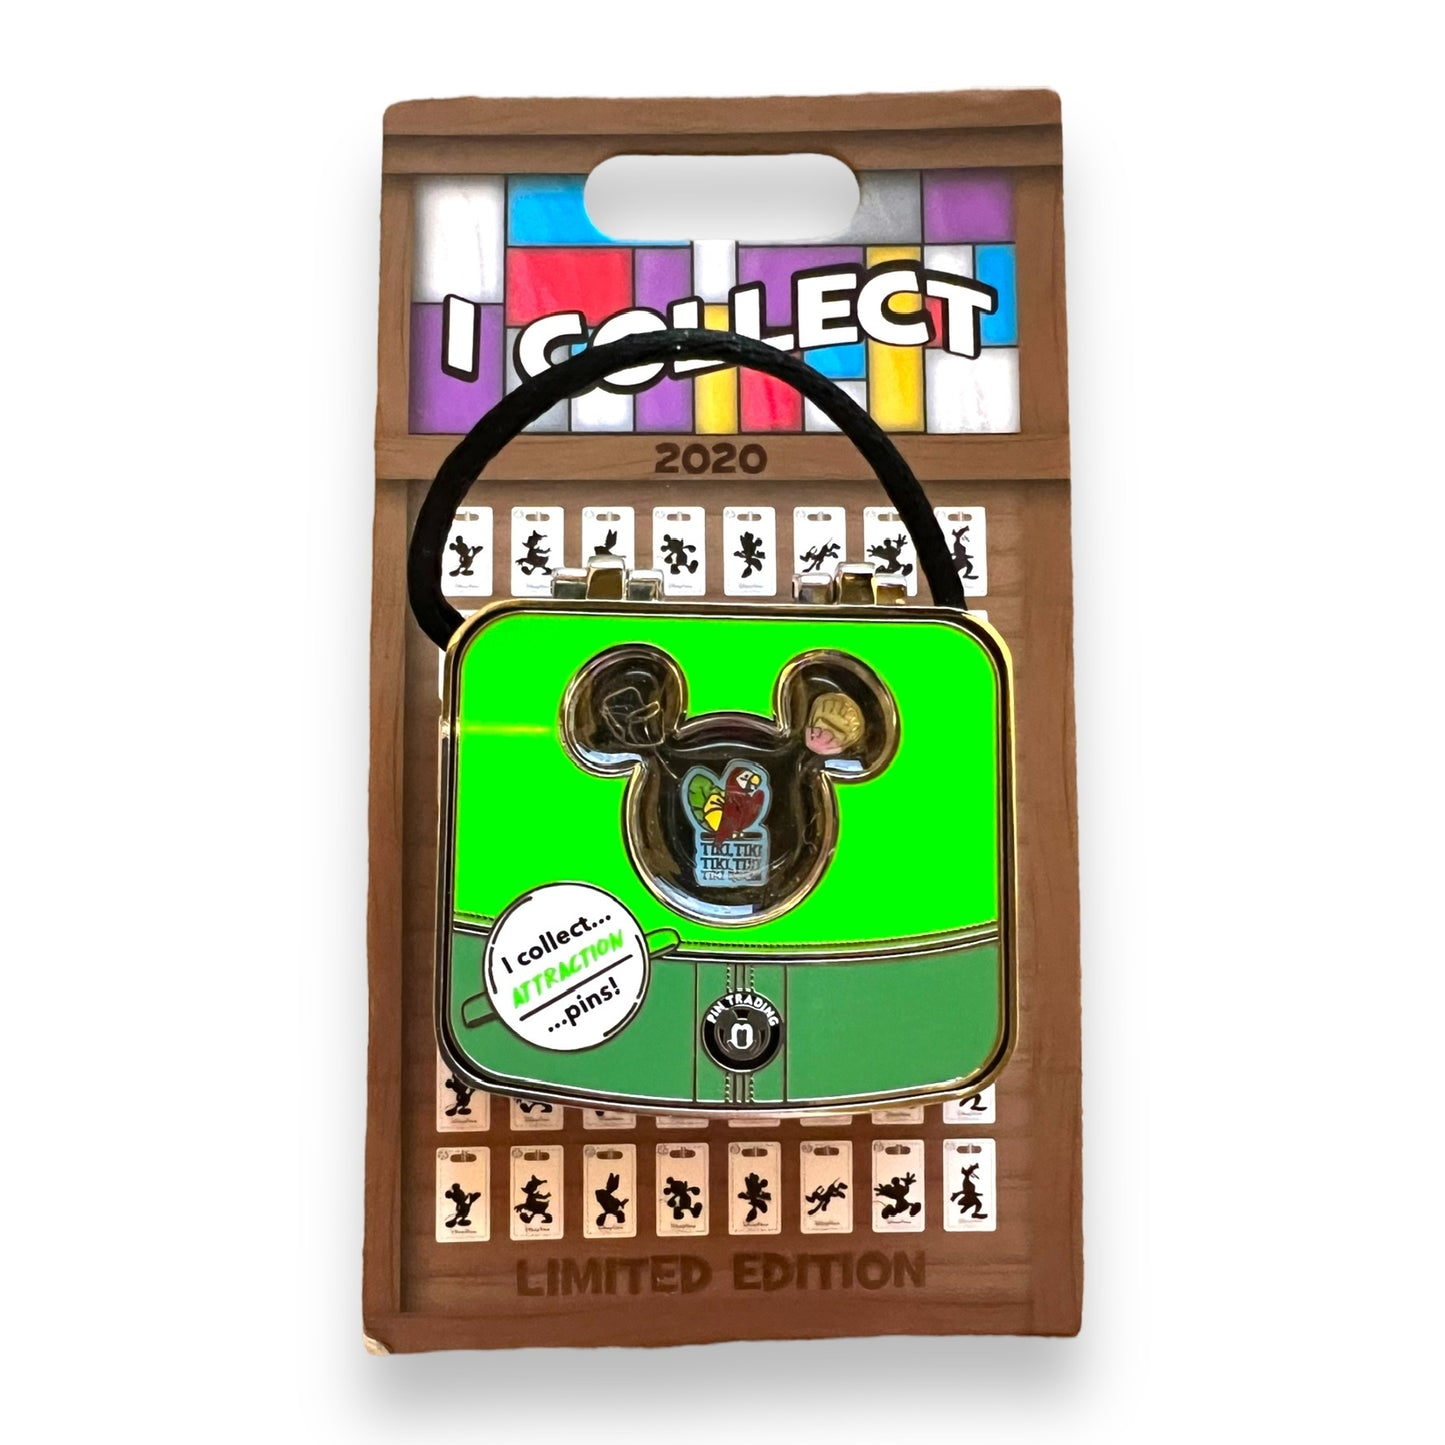 Attractions - "I Collect" Pin